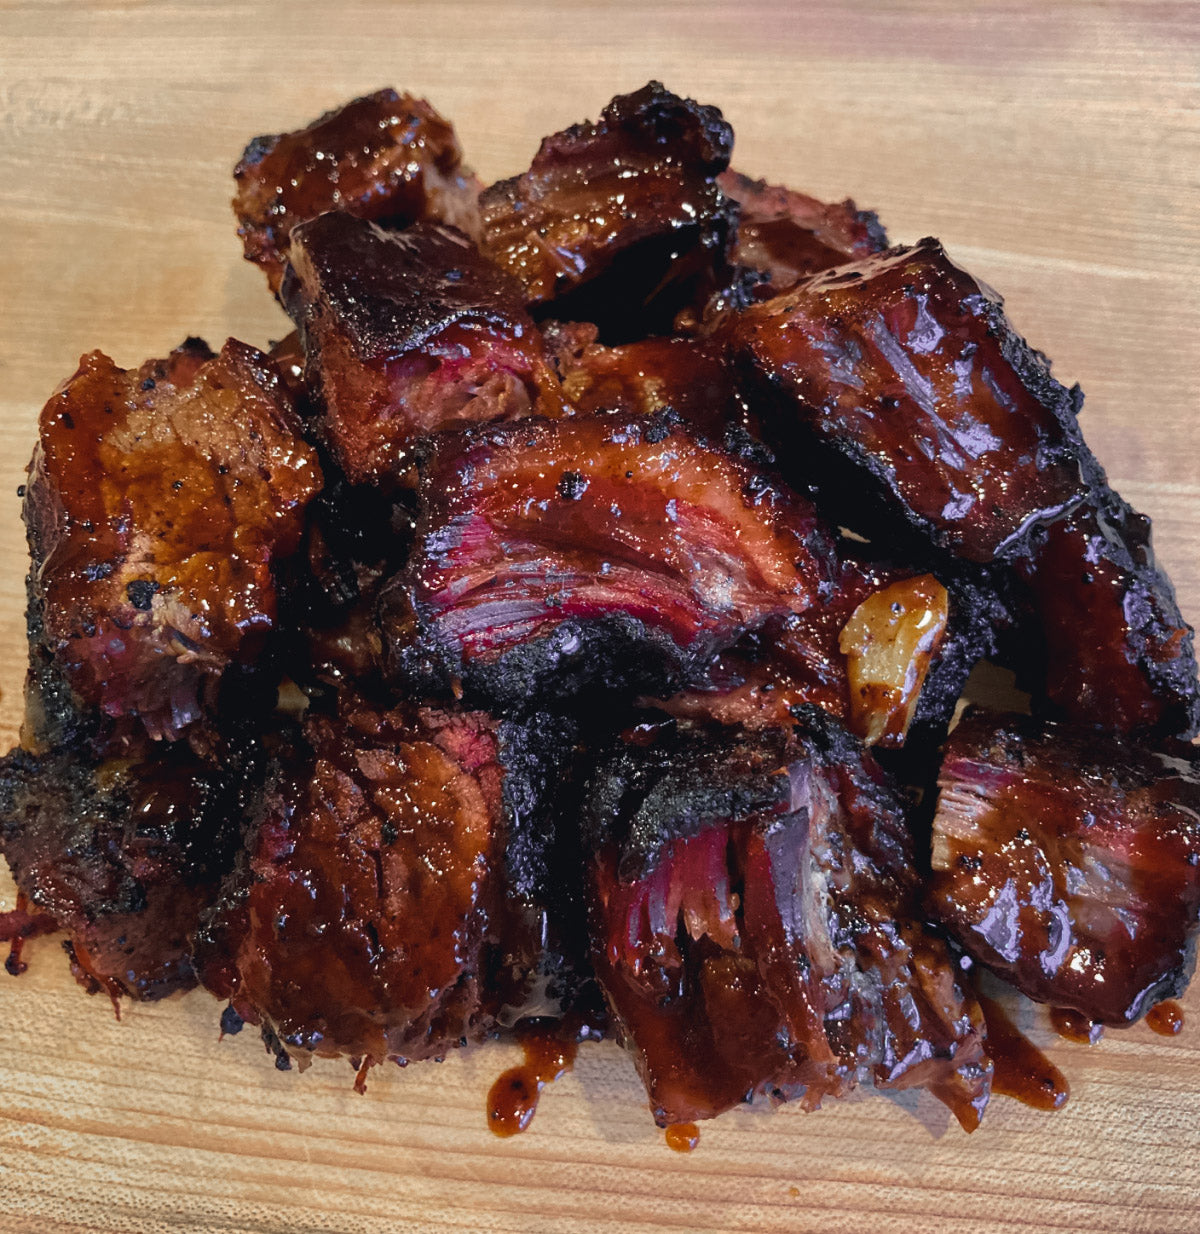 The Burnt End